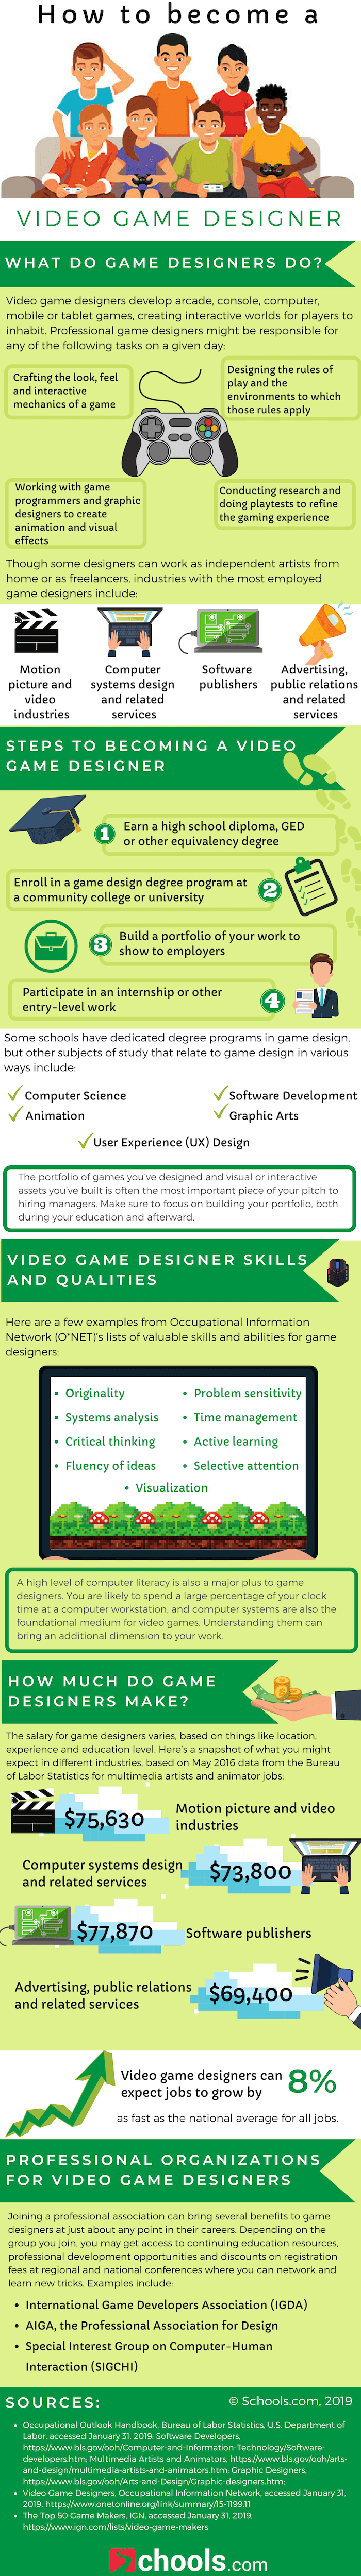 step-by-step visual guide of how to become a video game designer